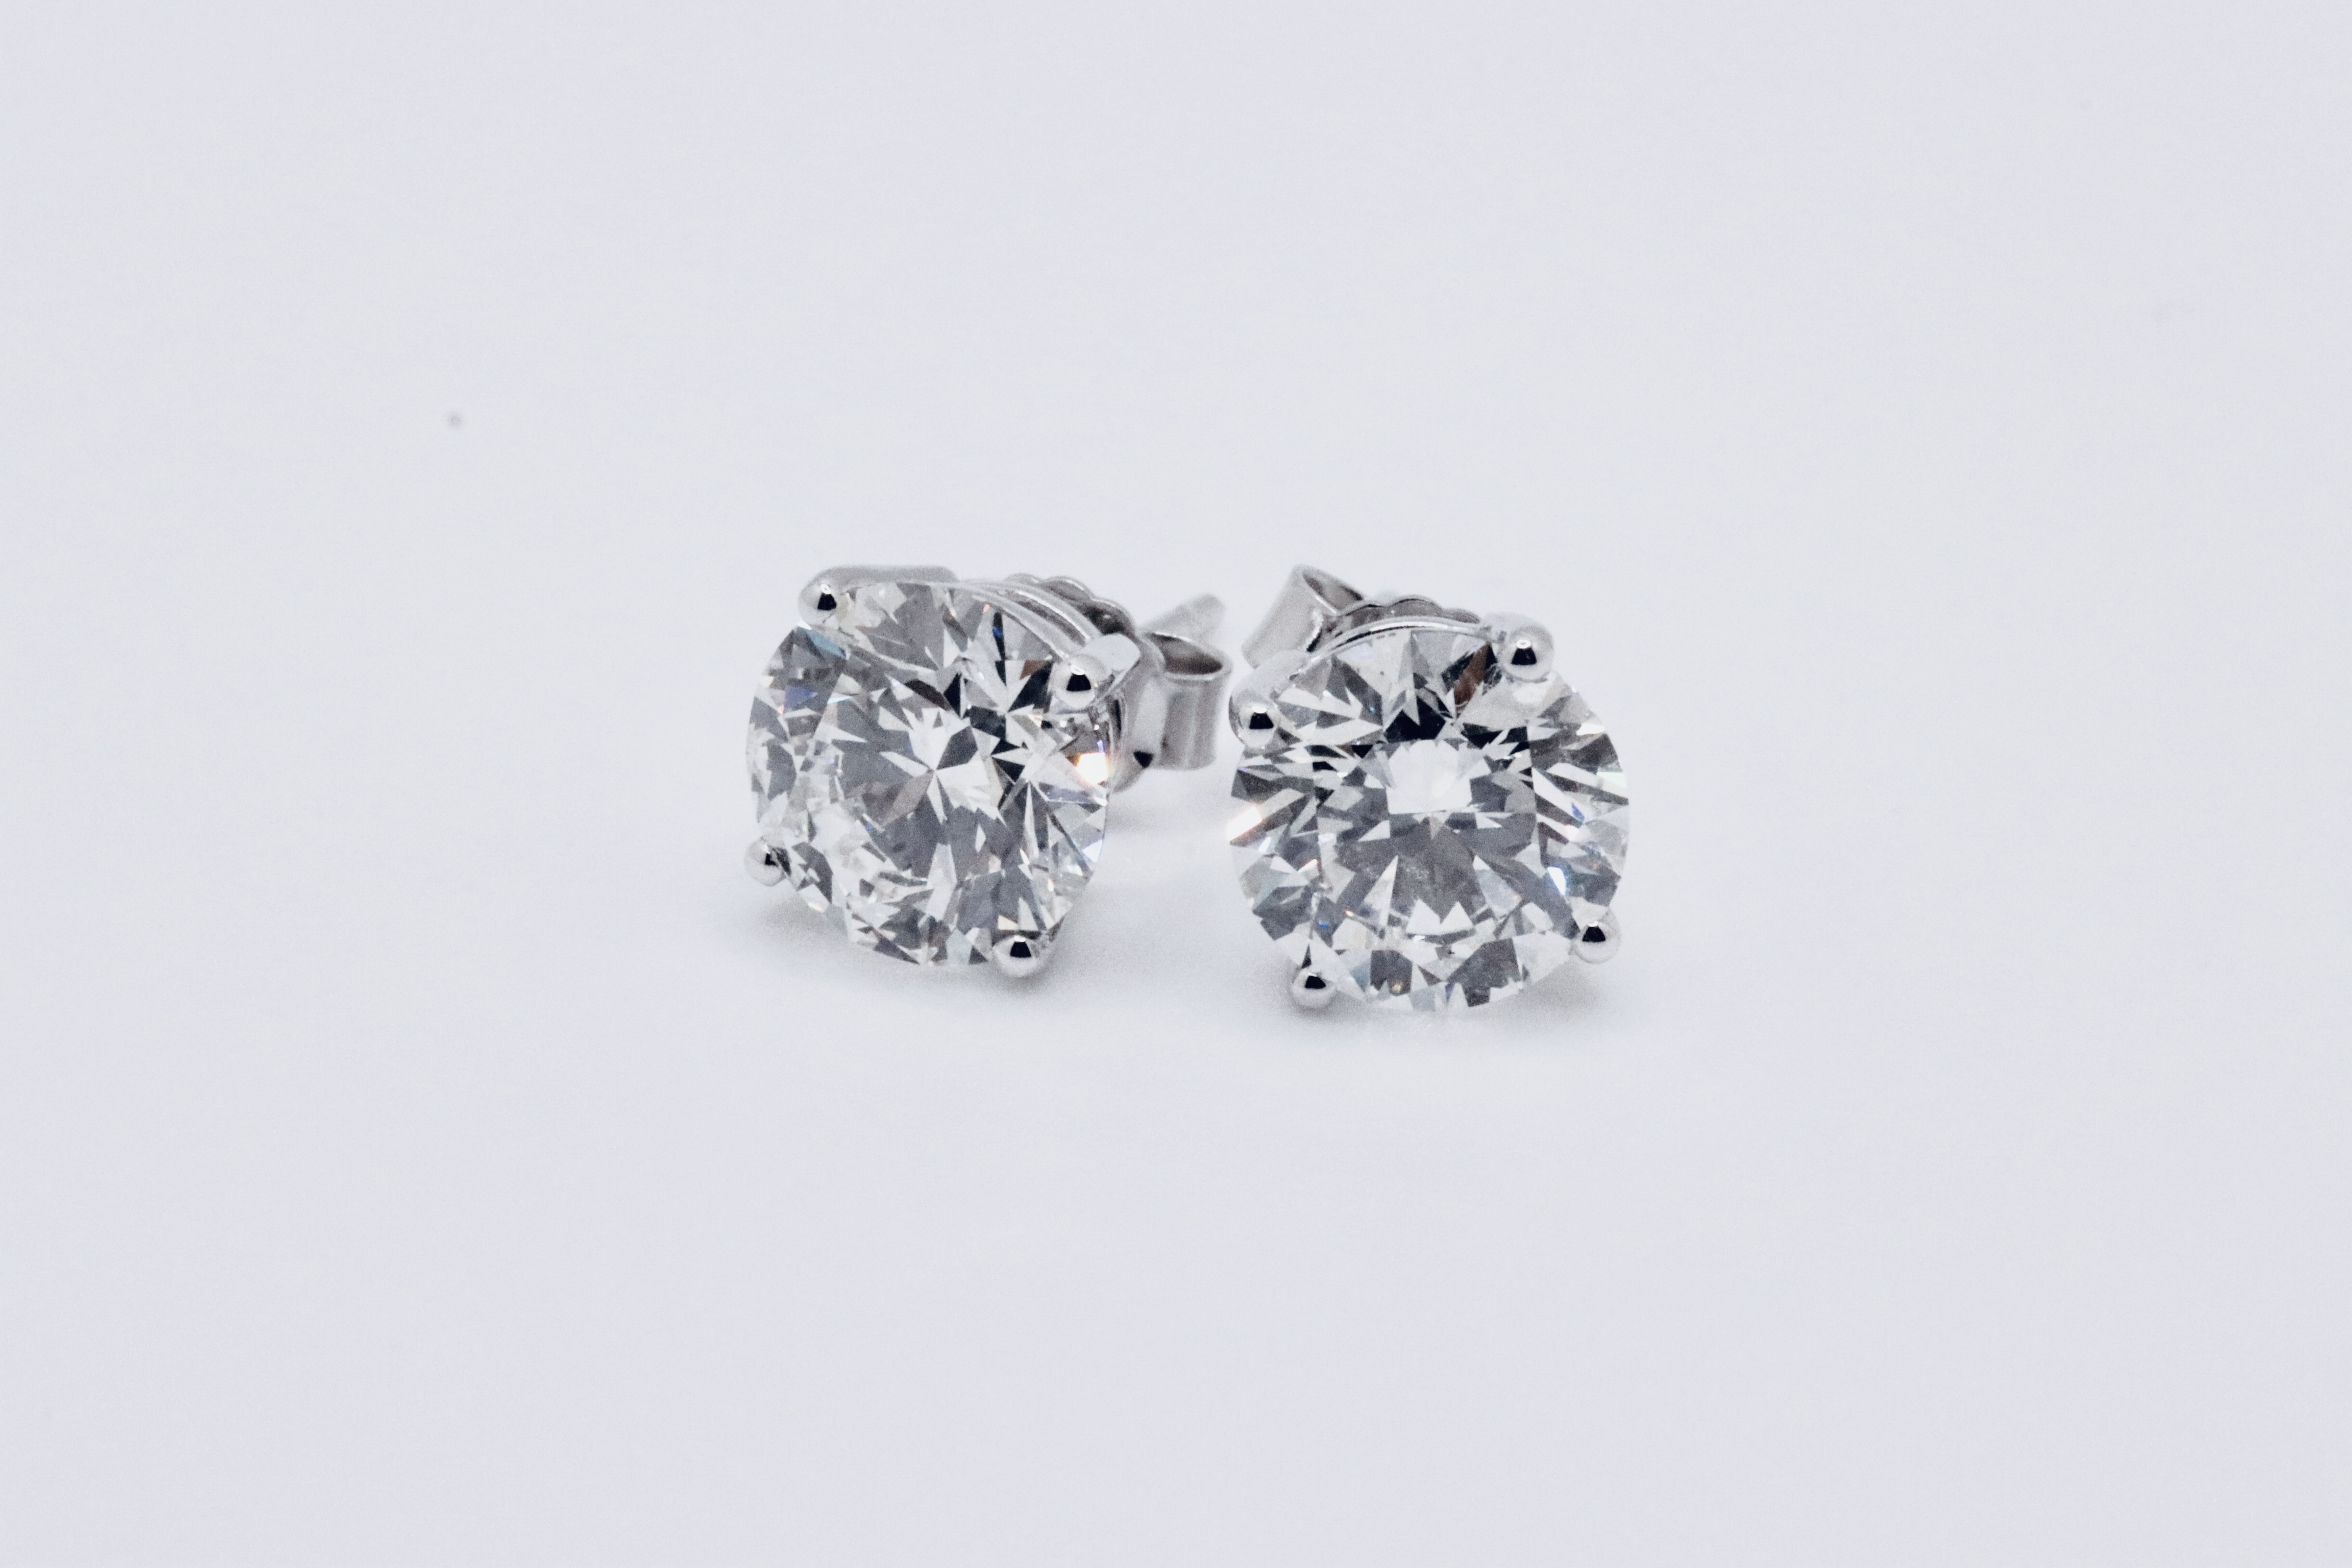 Round Brilliant Cut 3.00 Carat Natural Diamond Earrings 18kt White Gold - F Colour SI Clarity- GIA